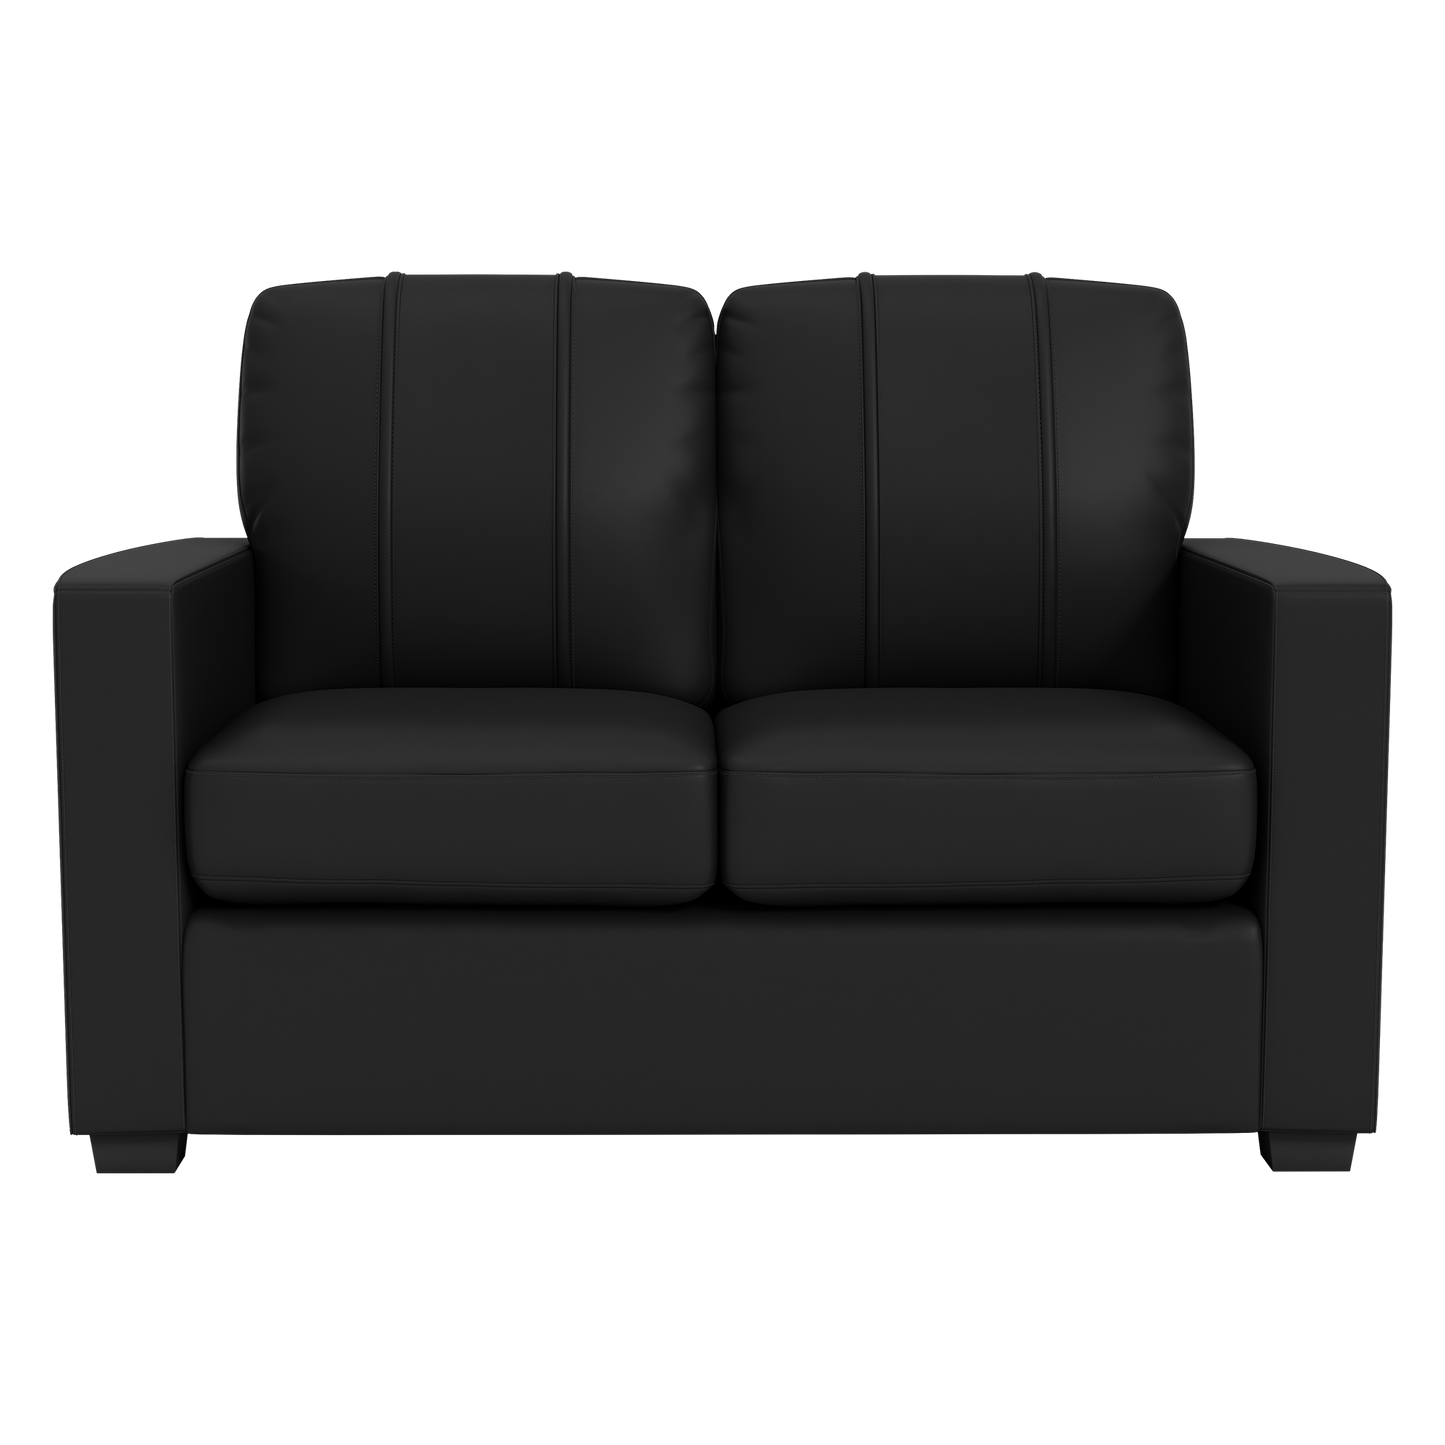 Silver Loveseat with  Pittsburgh Steelers Primary Logo